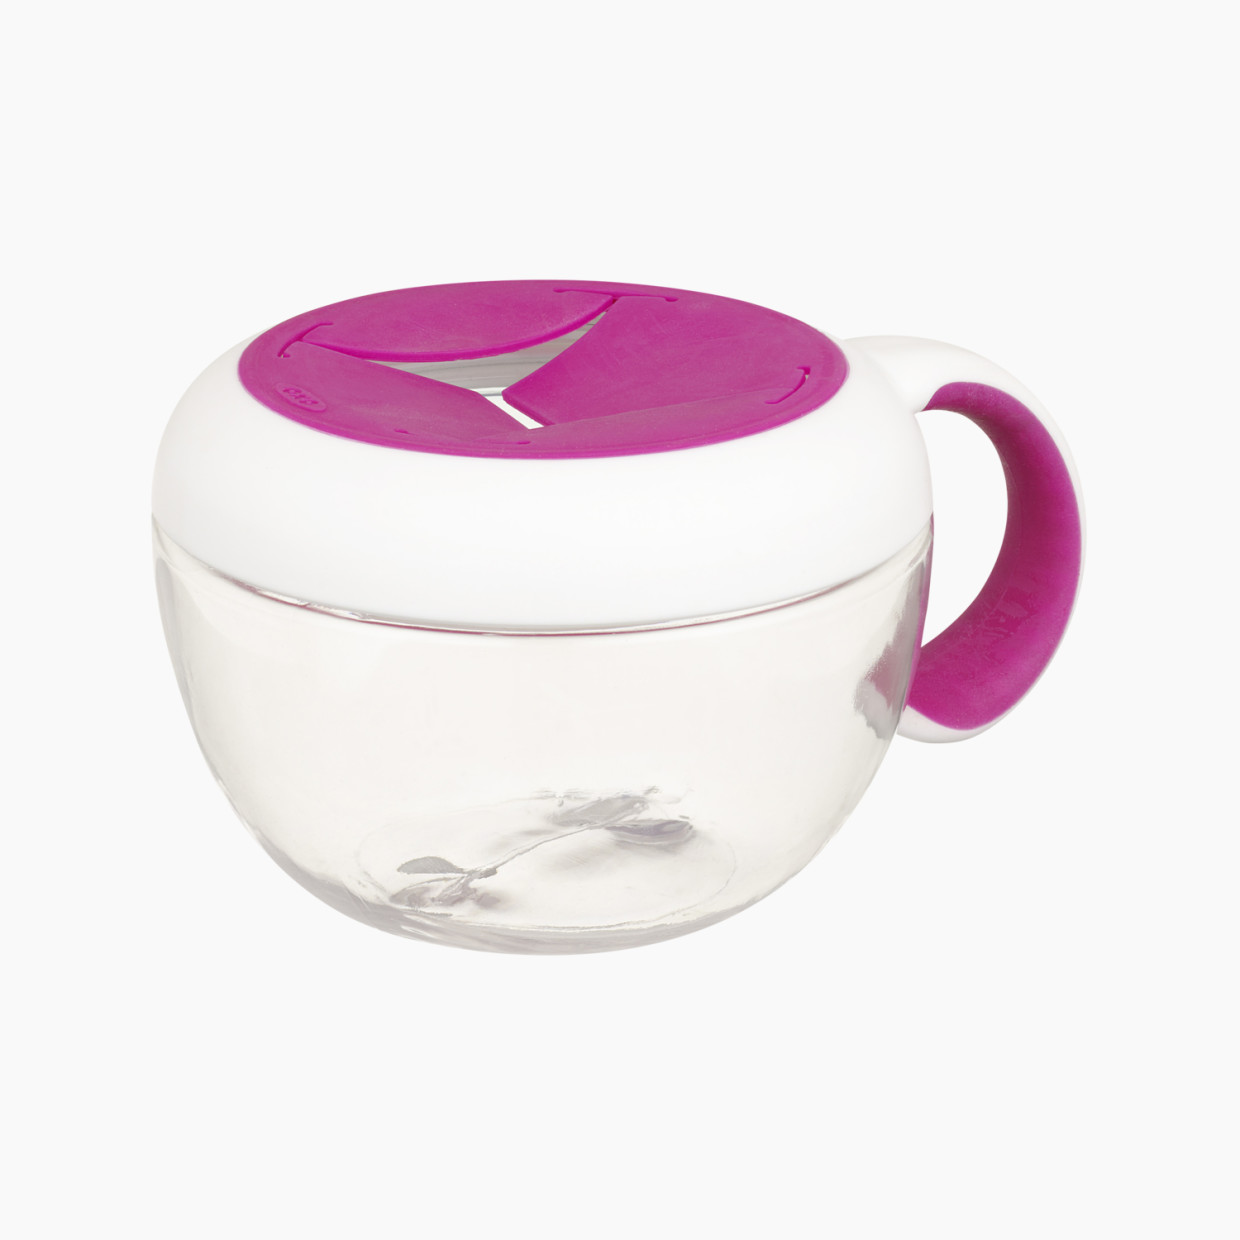 OXO Tot Flippy Snack Cup with Travel Lid - Pink.